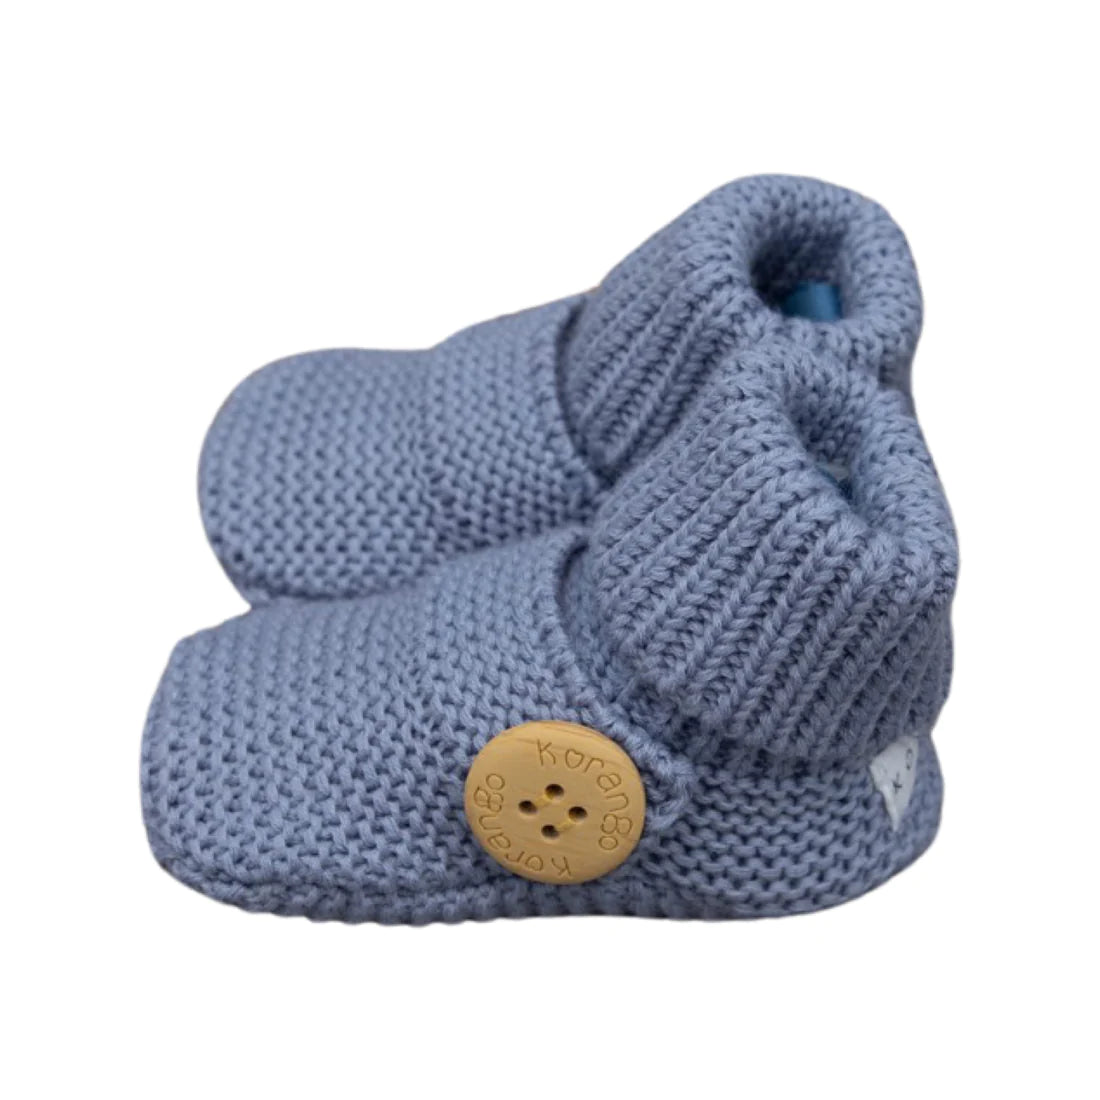 Cotton Knit Bootie with Gift Box - Dusty Blue